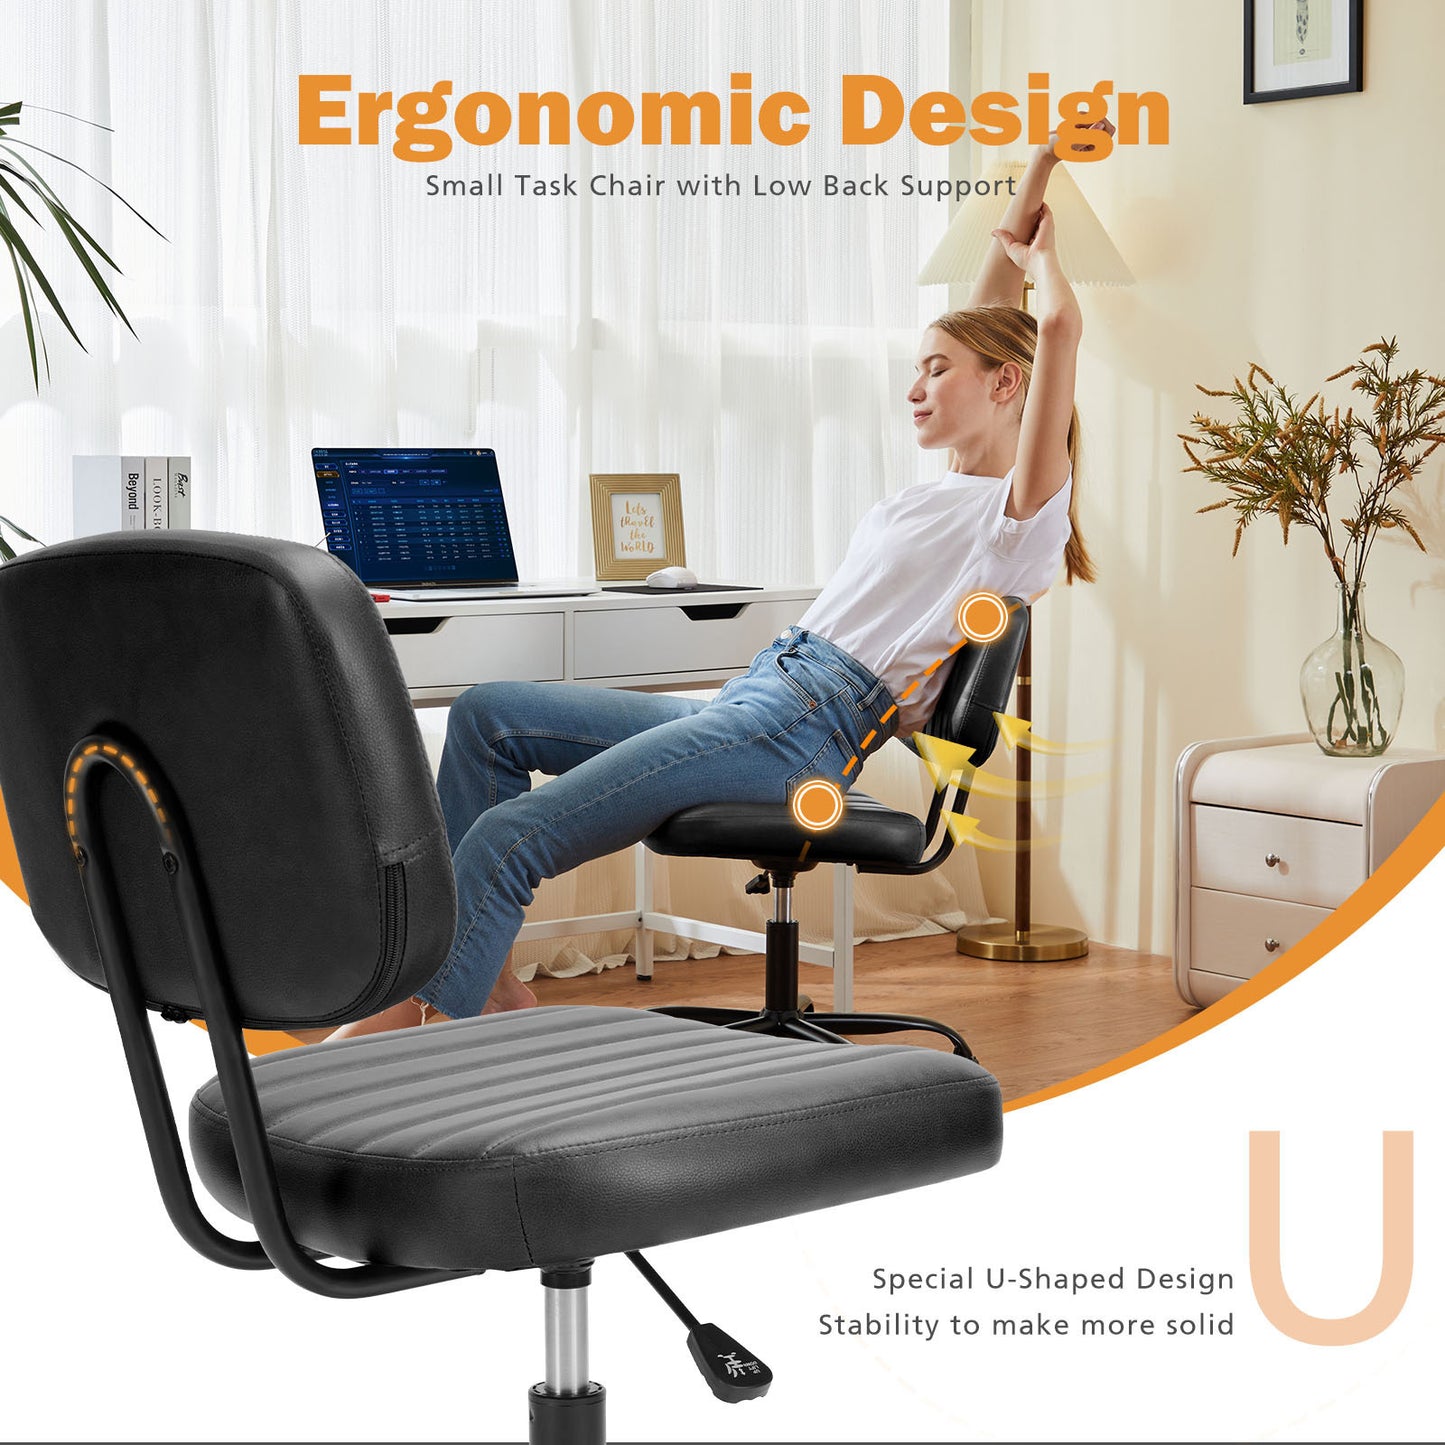 1st Choice Premium PU Leather Office Chair: Elevate Comfort & Style in Your Workspace